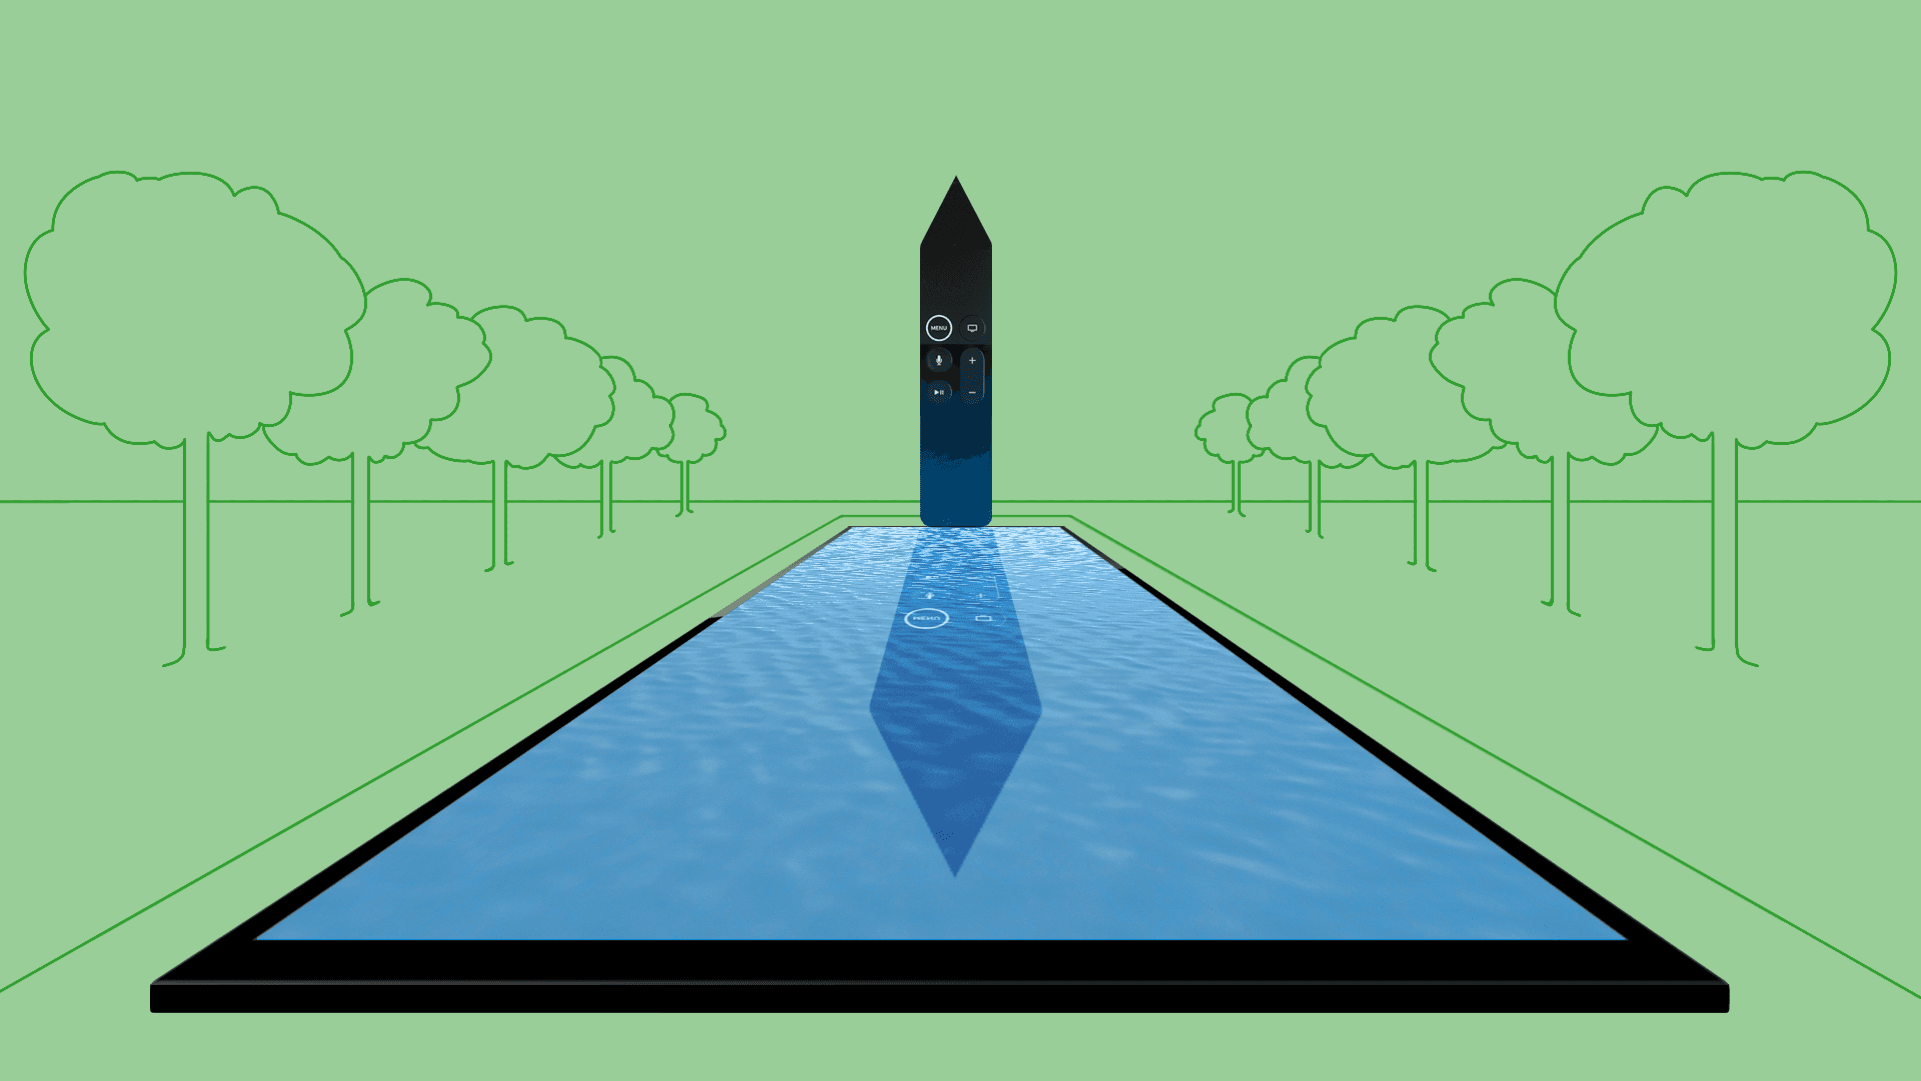 A tv remote, shaped like an obelisk, stands in front of a body of water where it's reflection is mirrored.